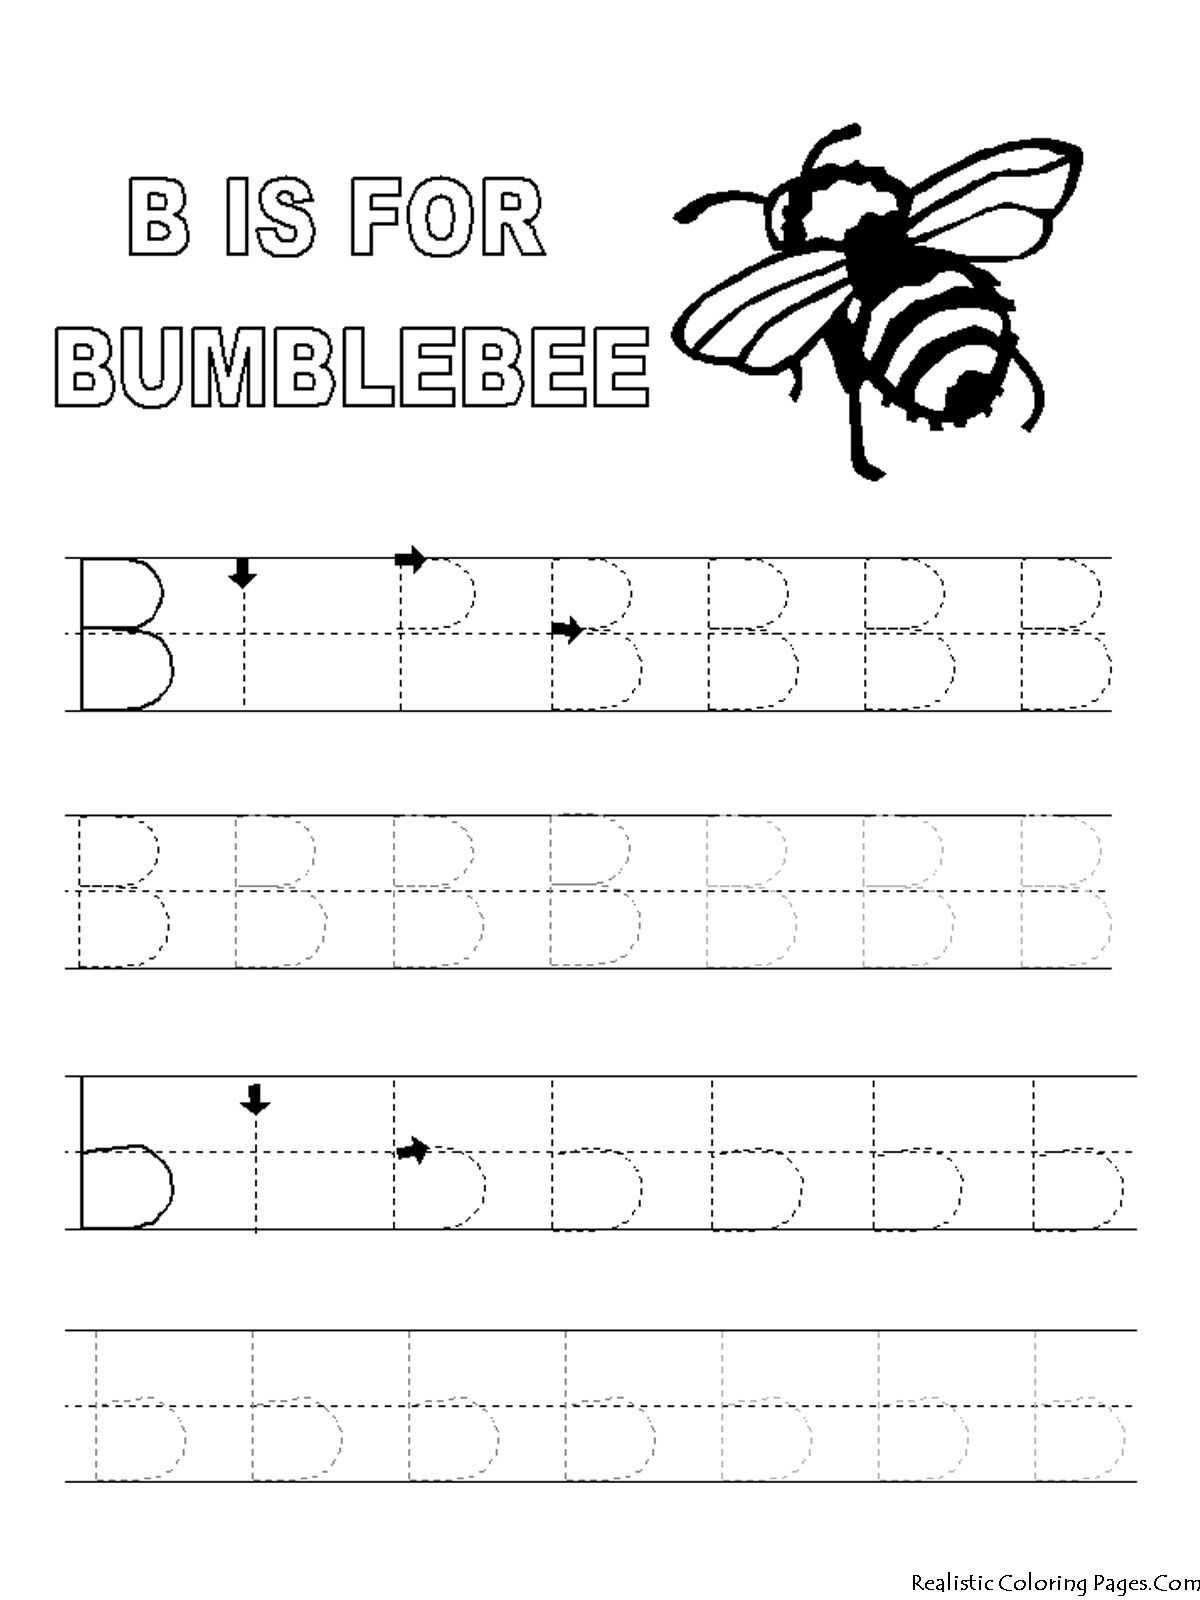 Traceable Name Worksheets as Well as Alphabet Tracer Pages B for Bumblebee Coloring Pages